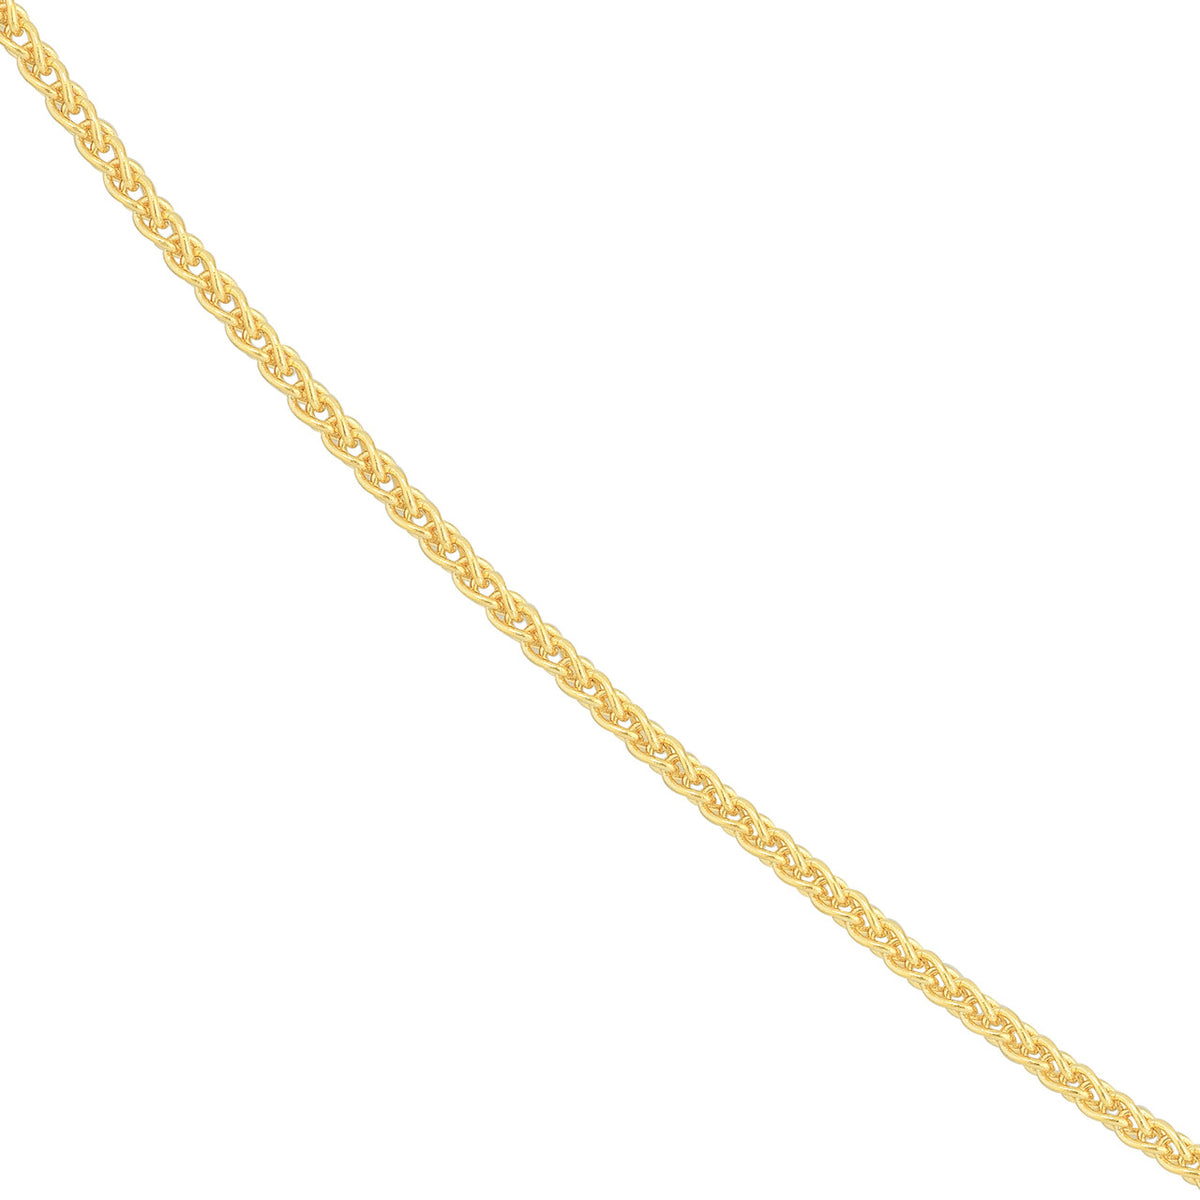 14K Yellow Gold or White Gold or Rose Gold 1.25mm Wheat Chain Necklace with Lobster Lock